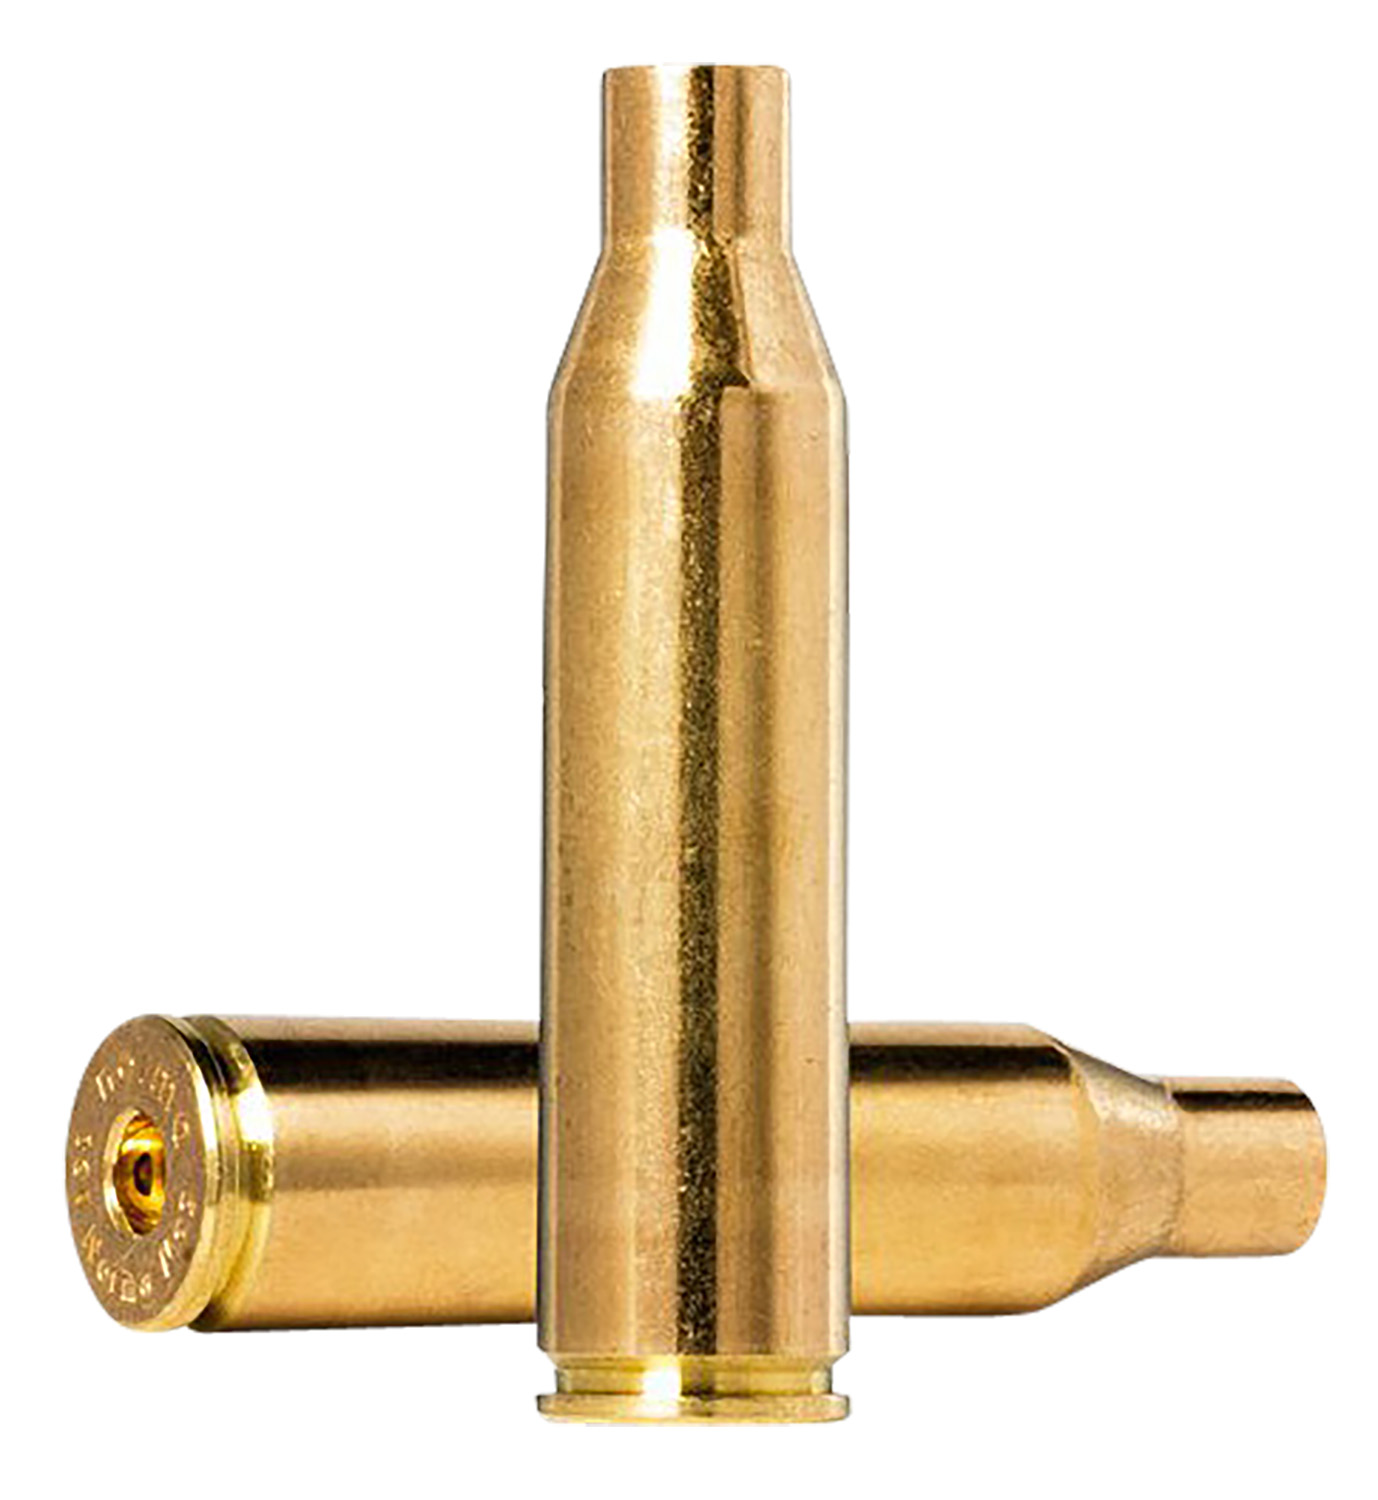 Norma Ammunition 10285207 Dedicated Components Reloading .338 Norma Mag Rifle Brass